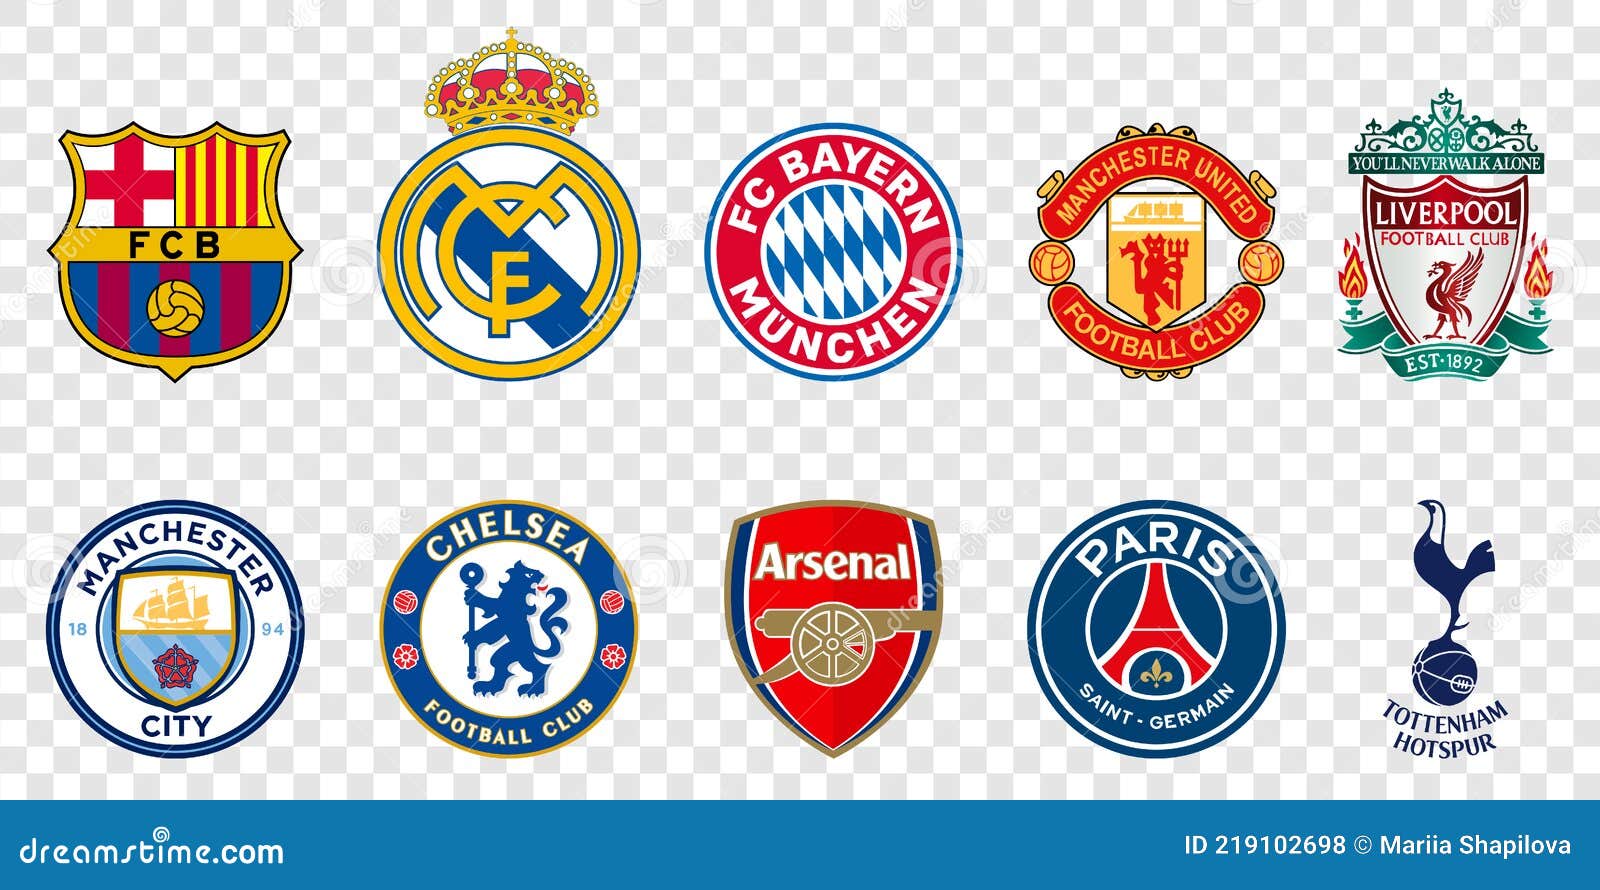 Top 10 Football Clubs in the World Editorial Stock Photo - Illustration of arsenal, 219102698